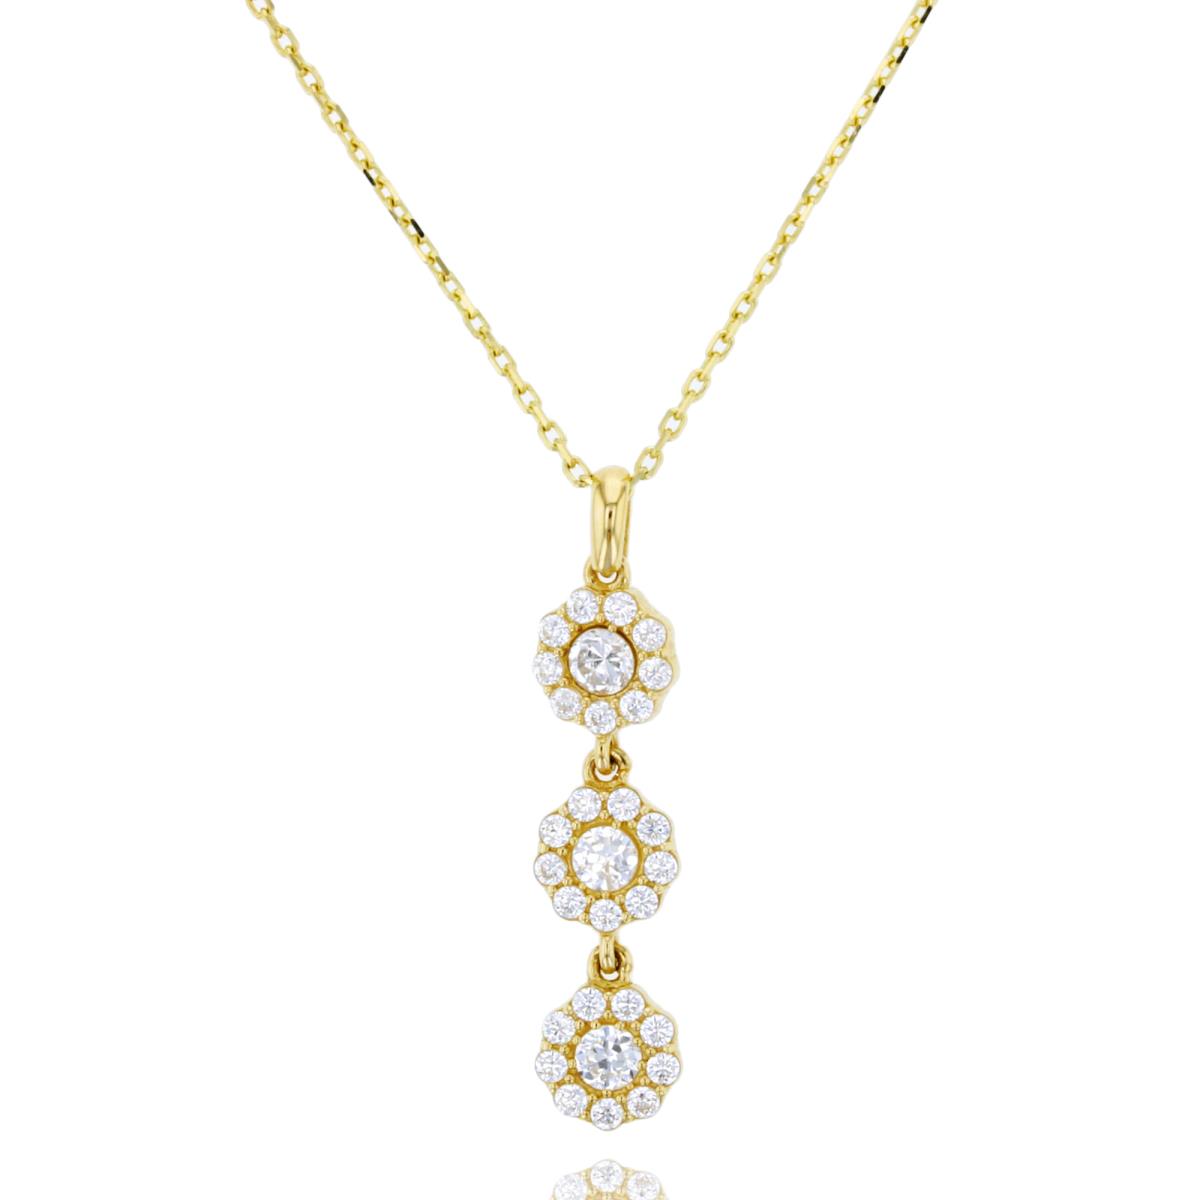 10K Yellow Gold Triple Cluster Flowers 18" Necklace